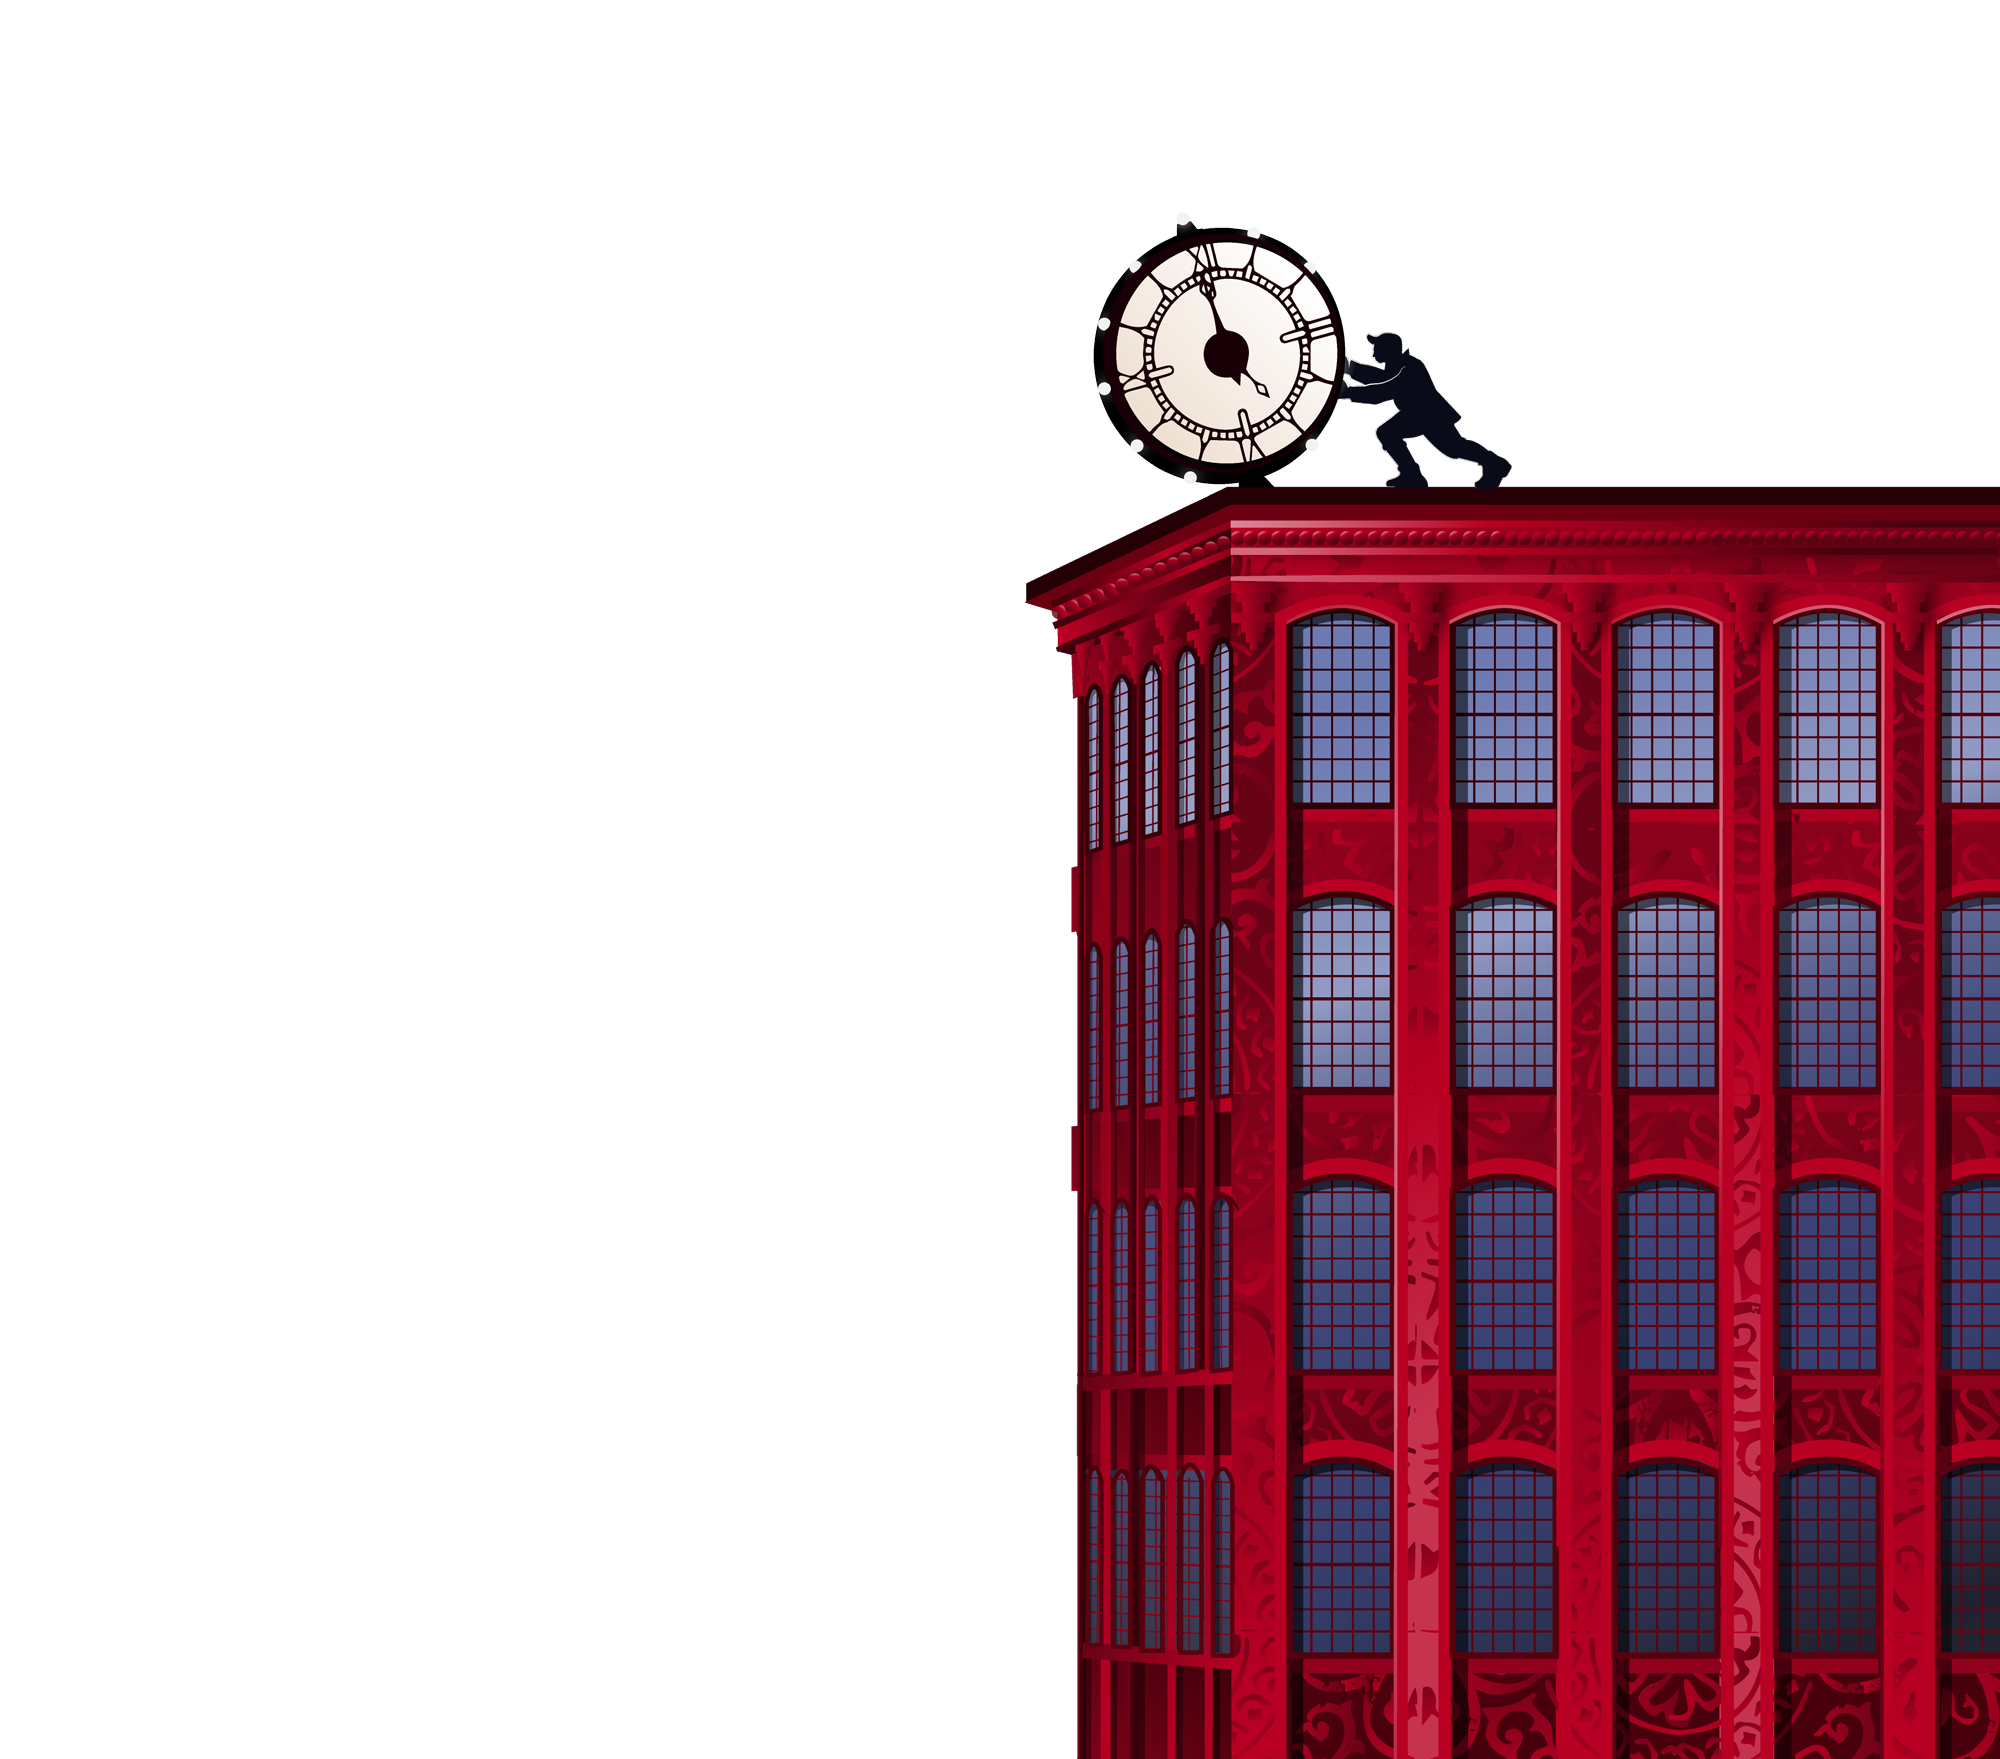 Illustration of a red city apartment building with a clock on top